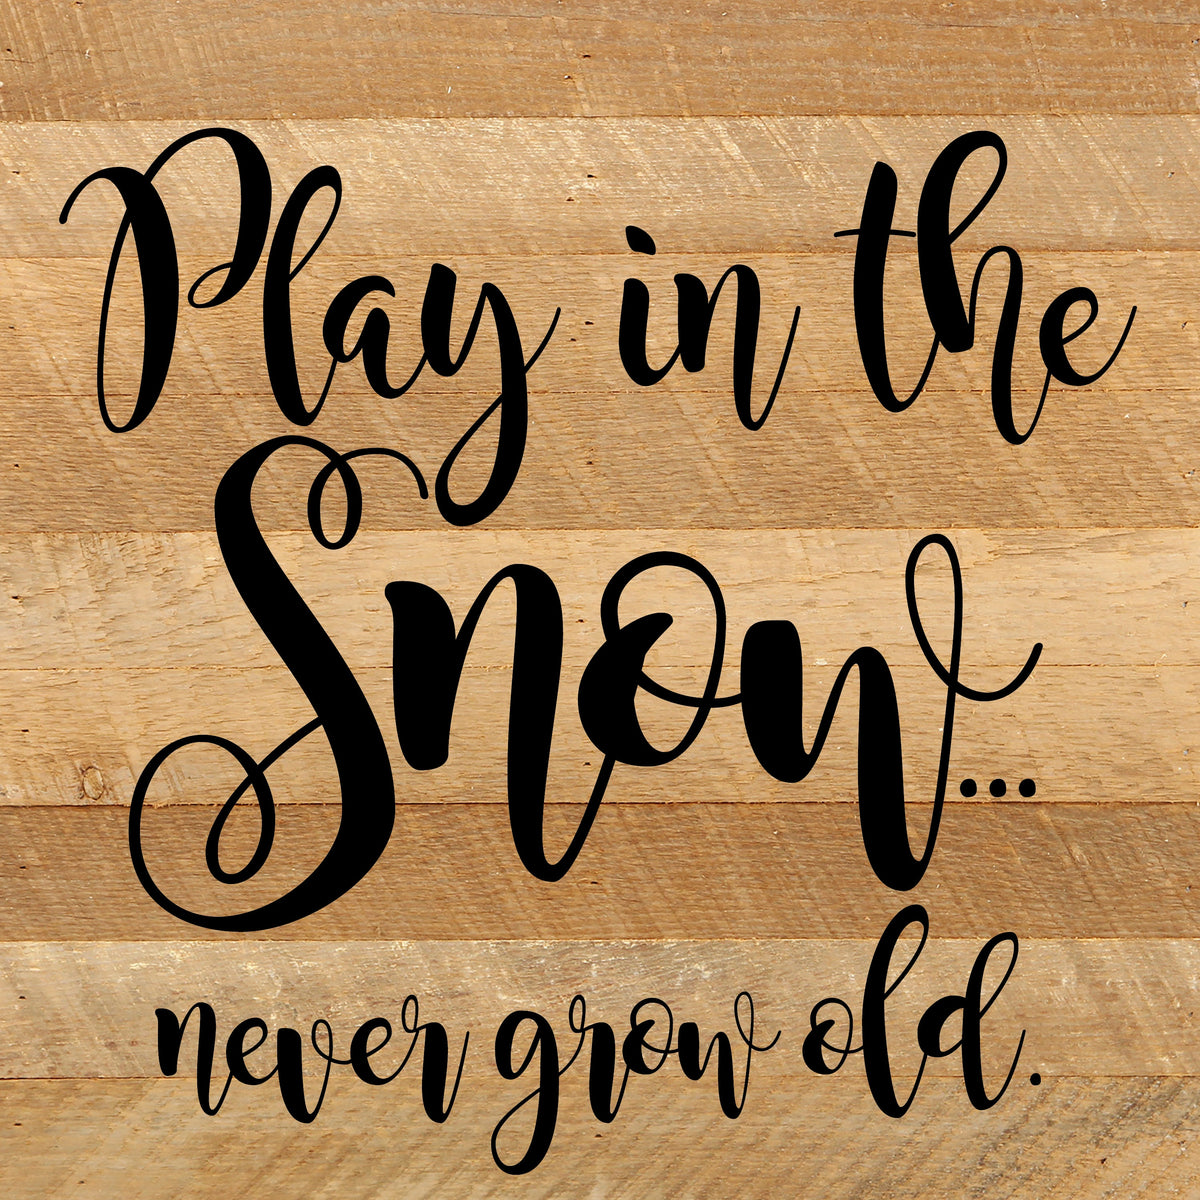 Play in the snow...never grow old. / 10"x10" Reclaimed Wood Sign